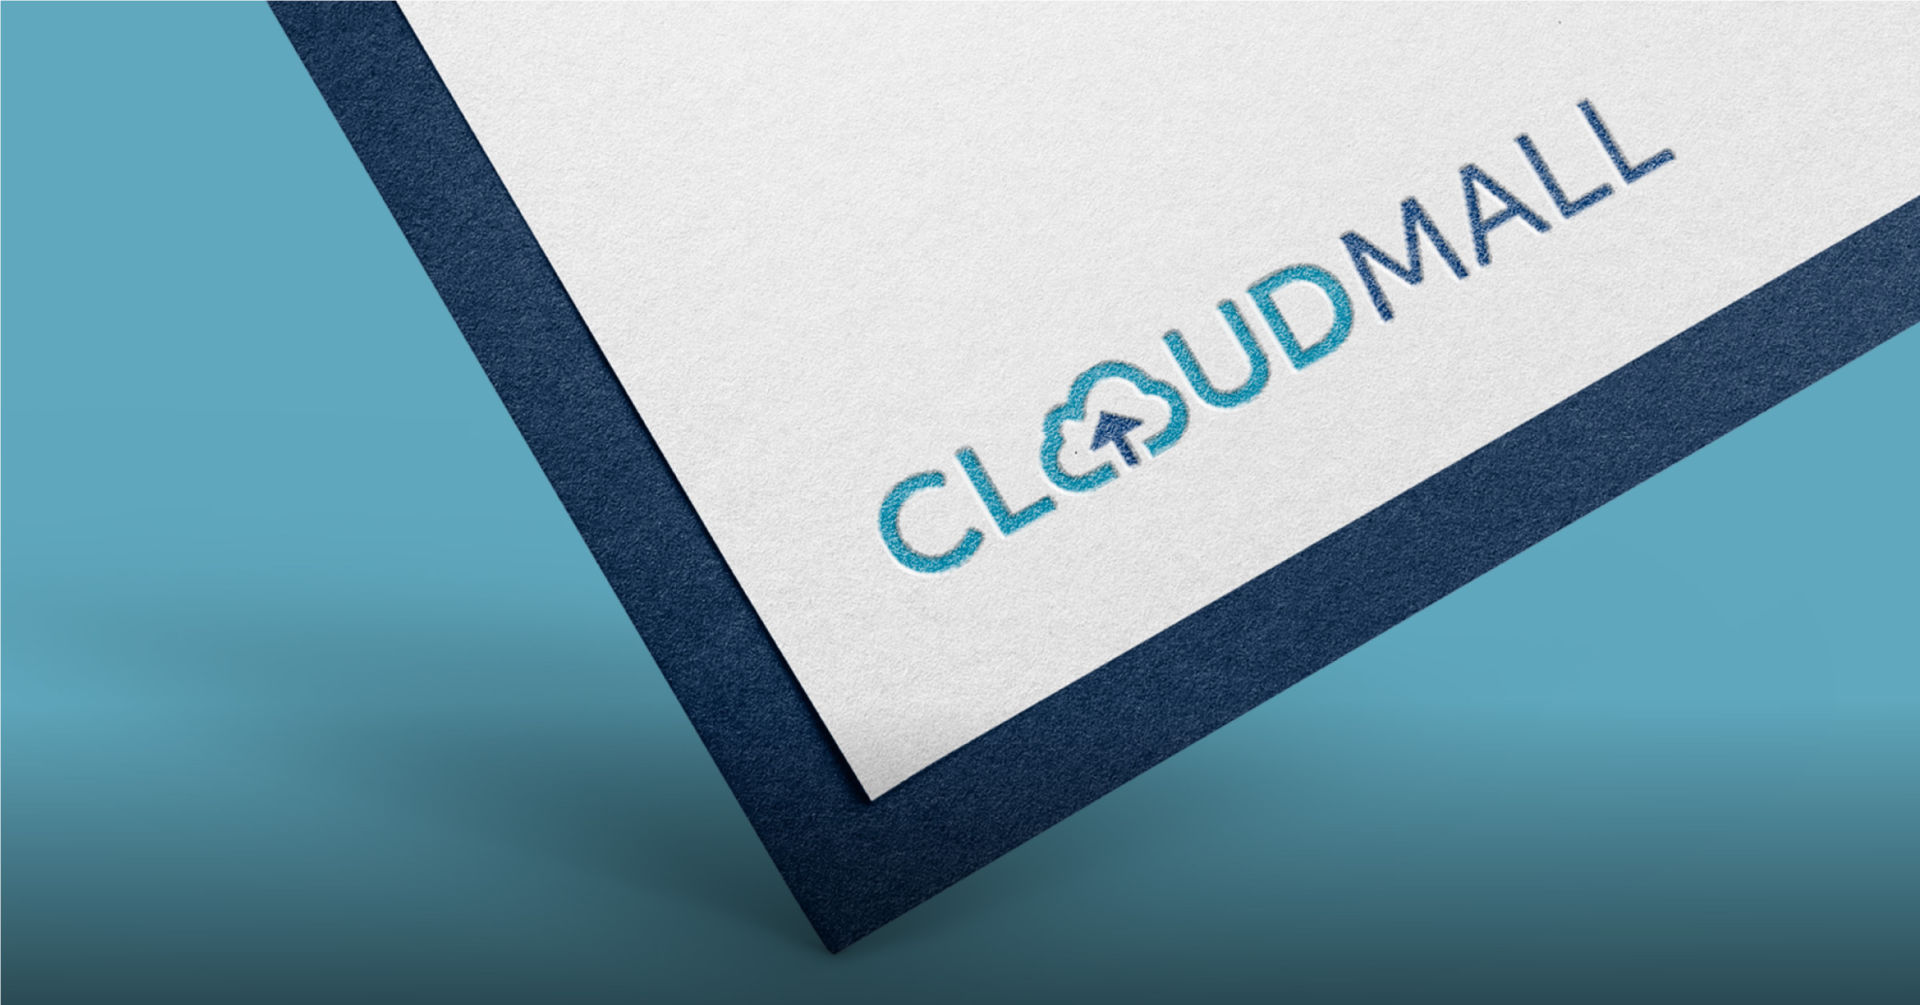 Cloudmall Records $1.5mn Monthly Revenue Growth With Anchanto